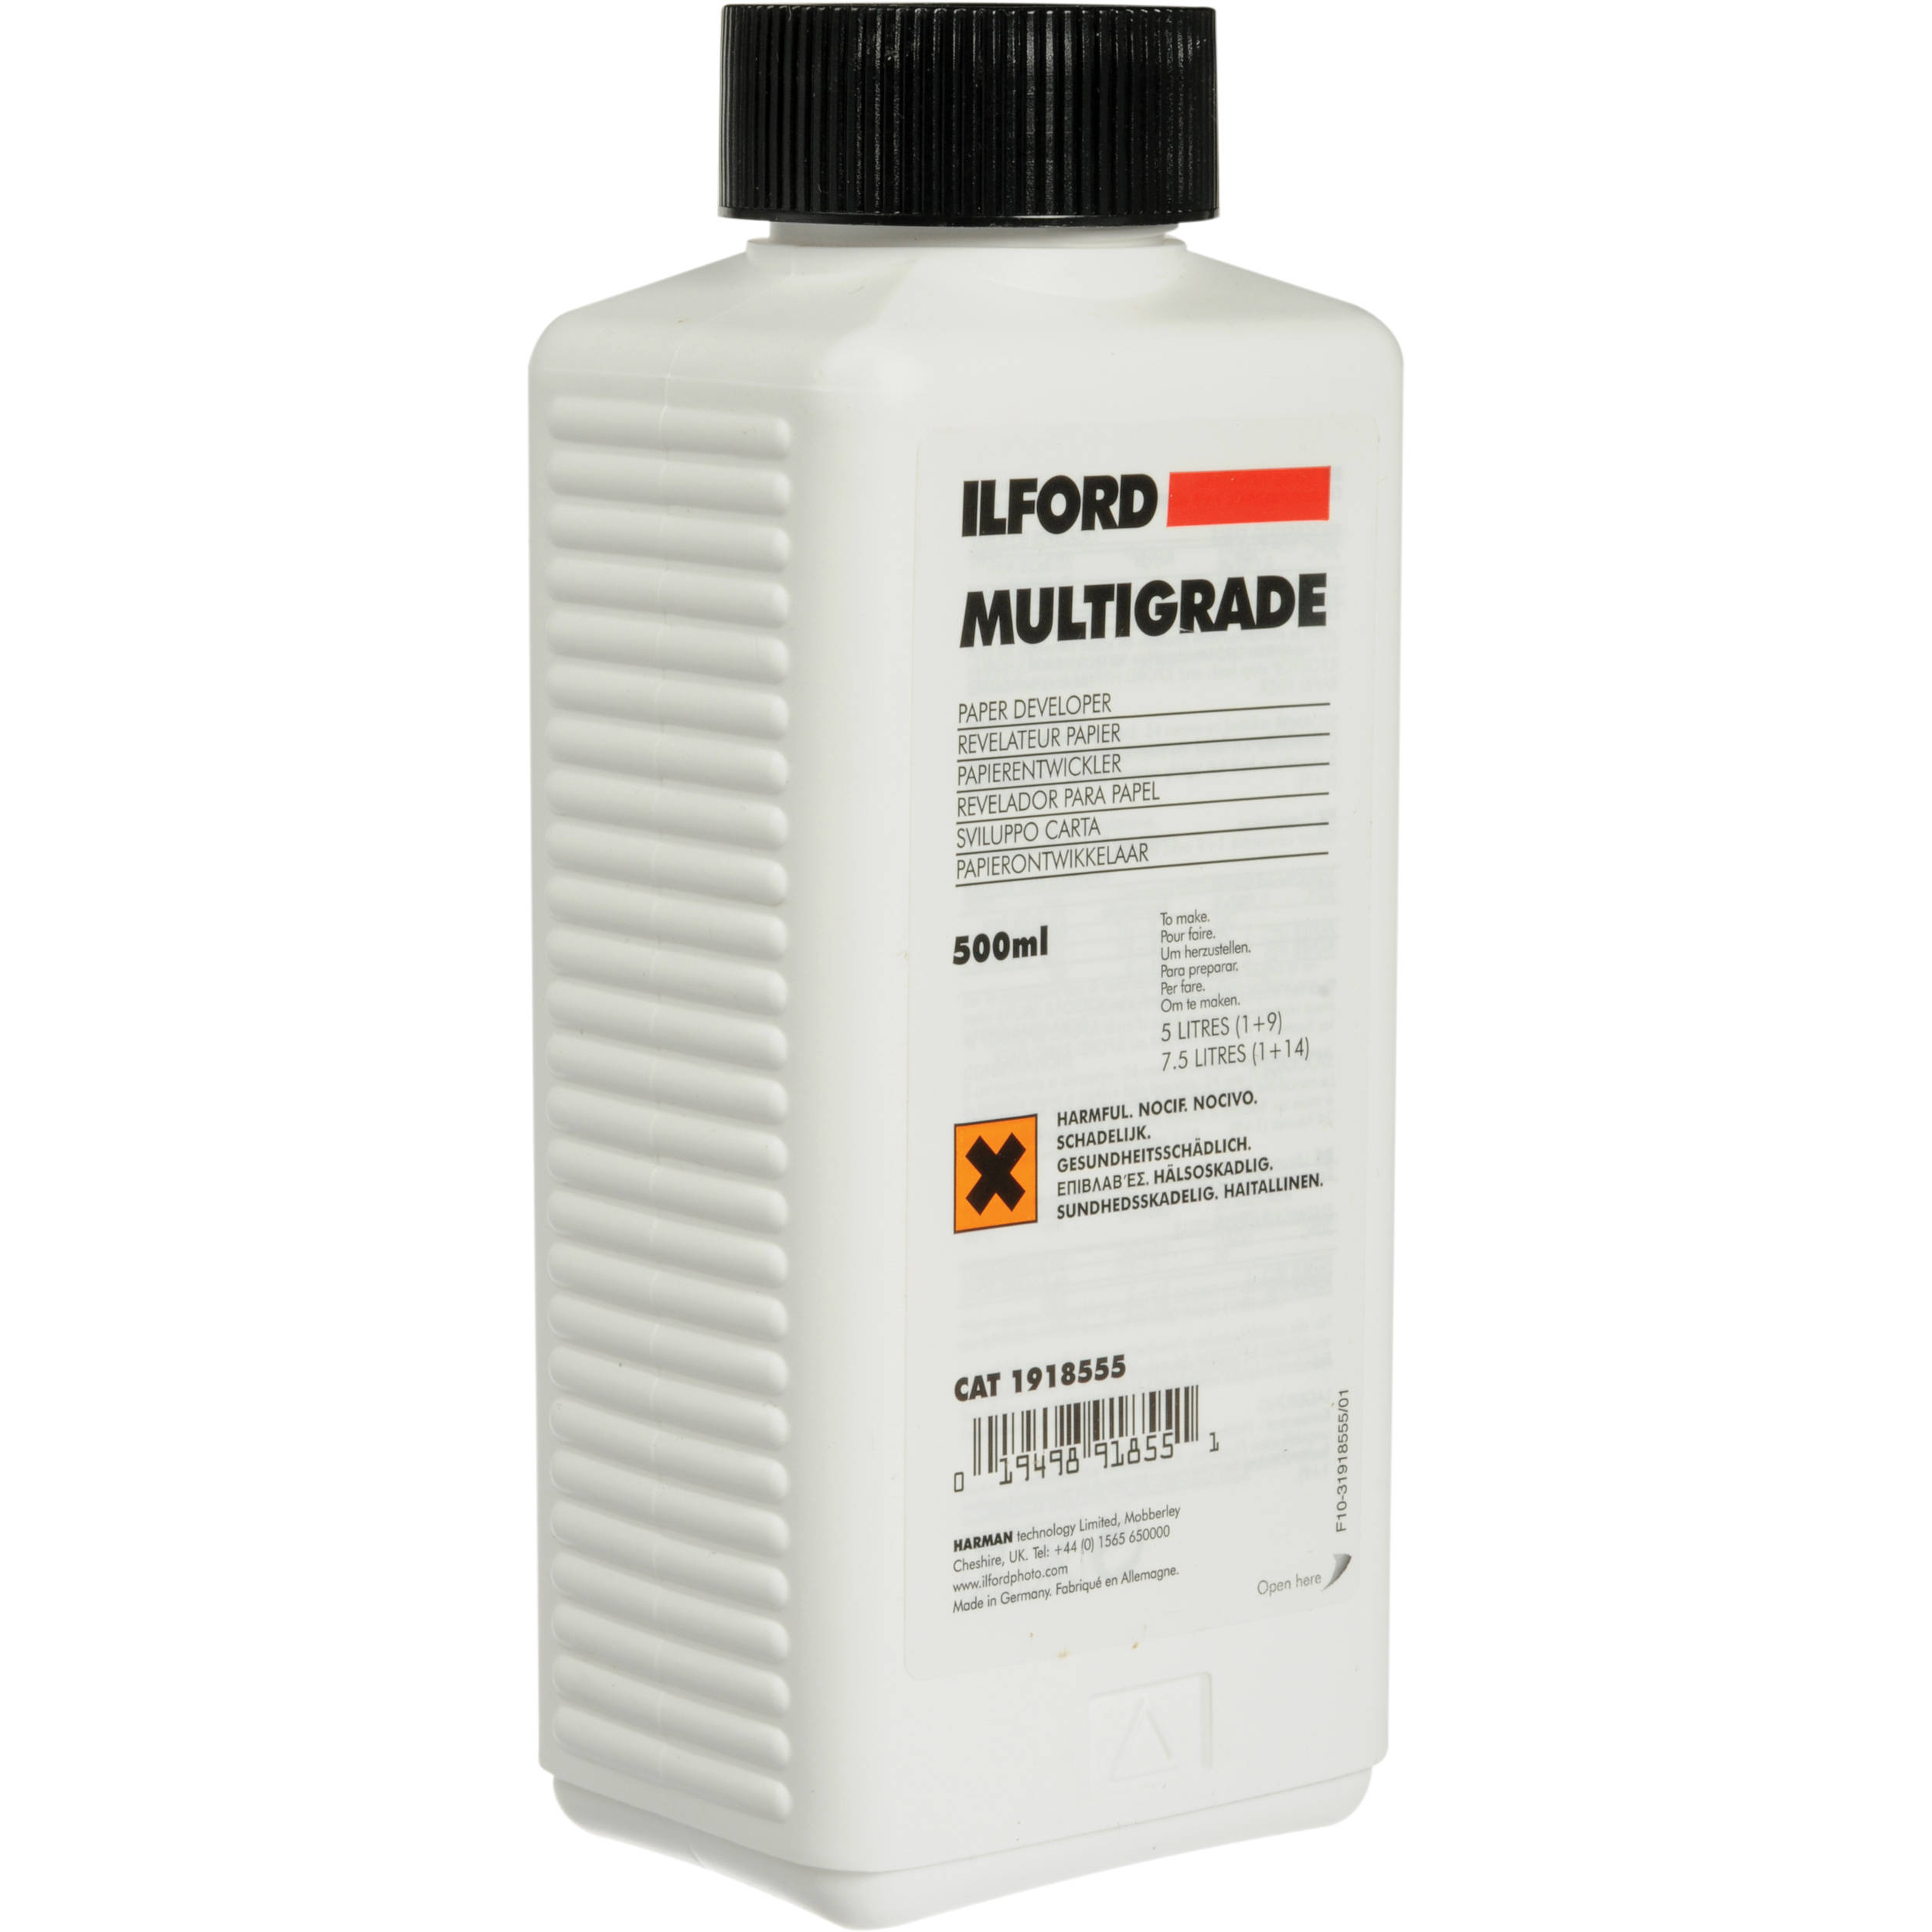 ilford multigrade papers a manual for the darkroom